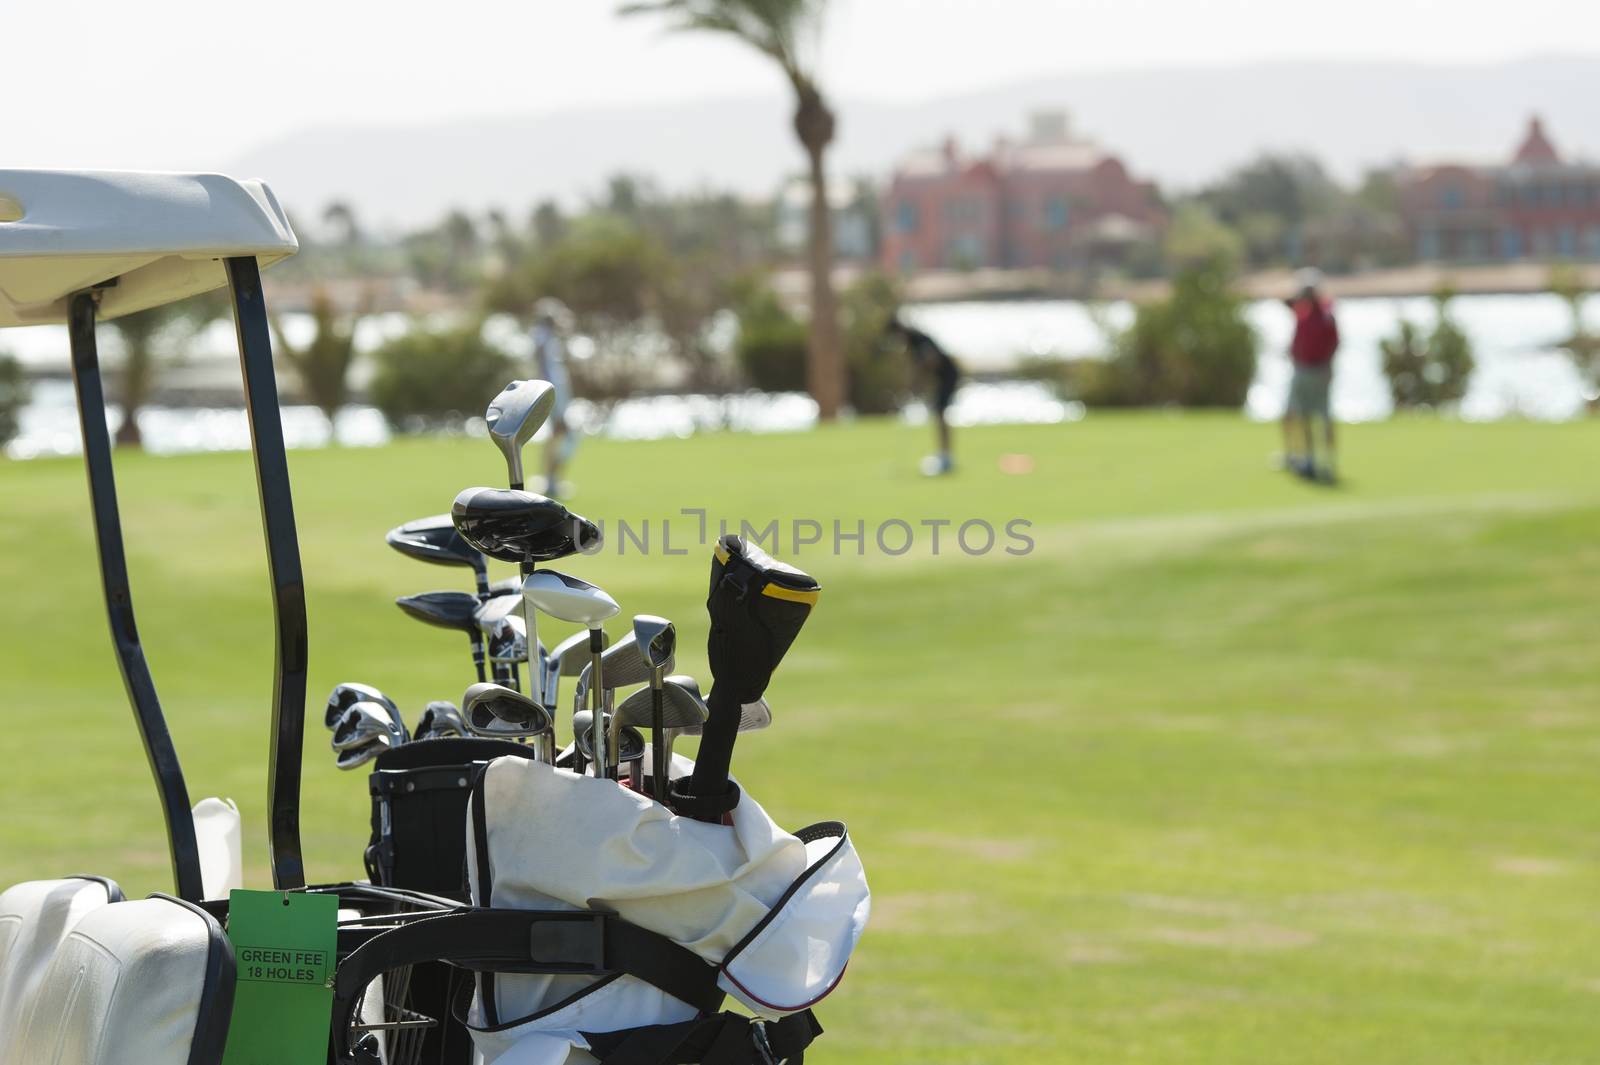 Closeup detail of golf clubs in a bag with golfers on the green in background